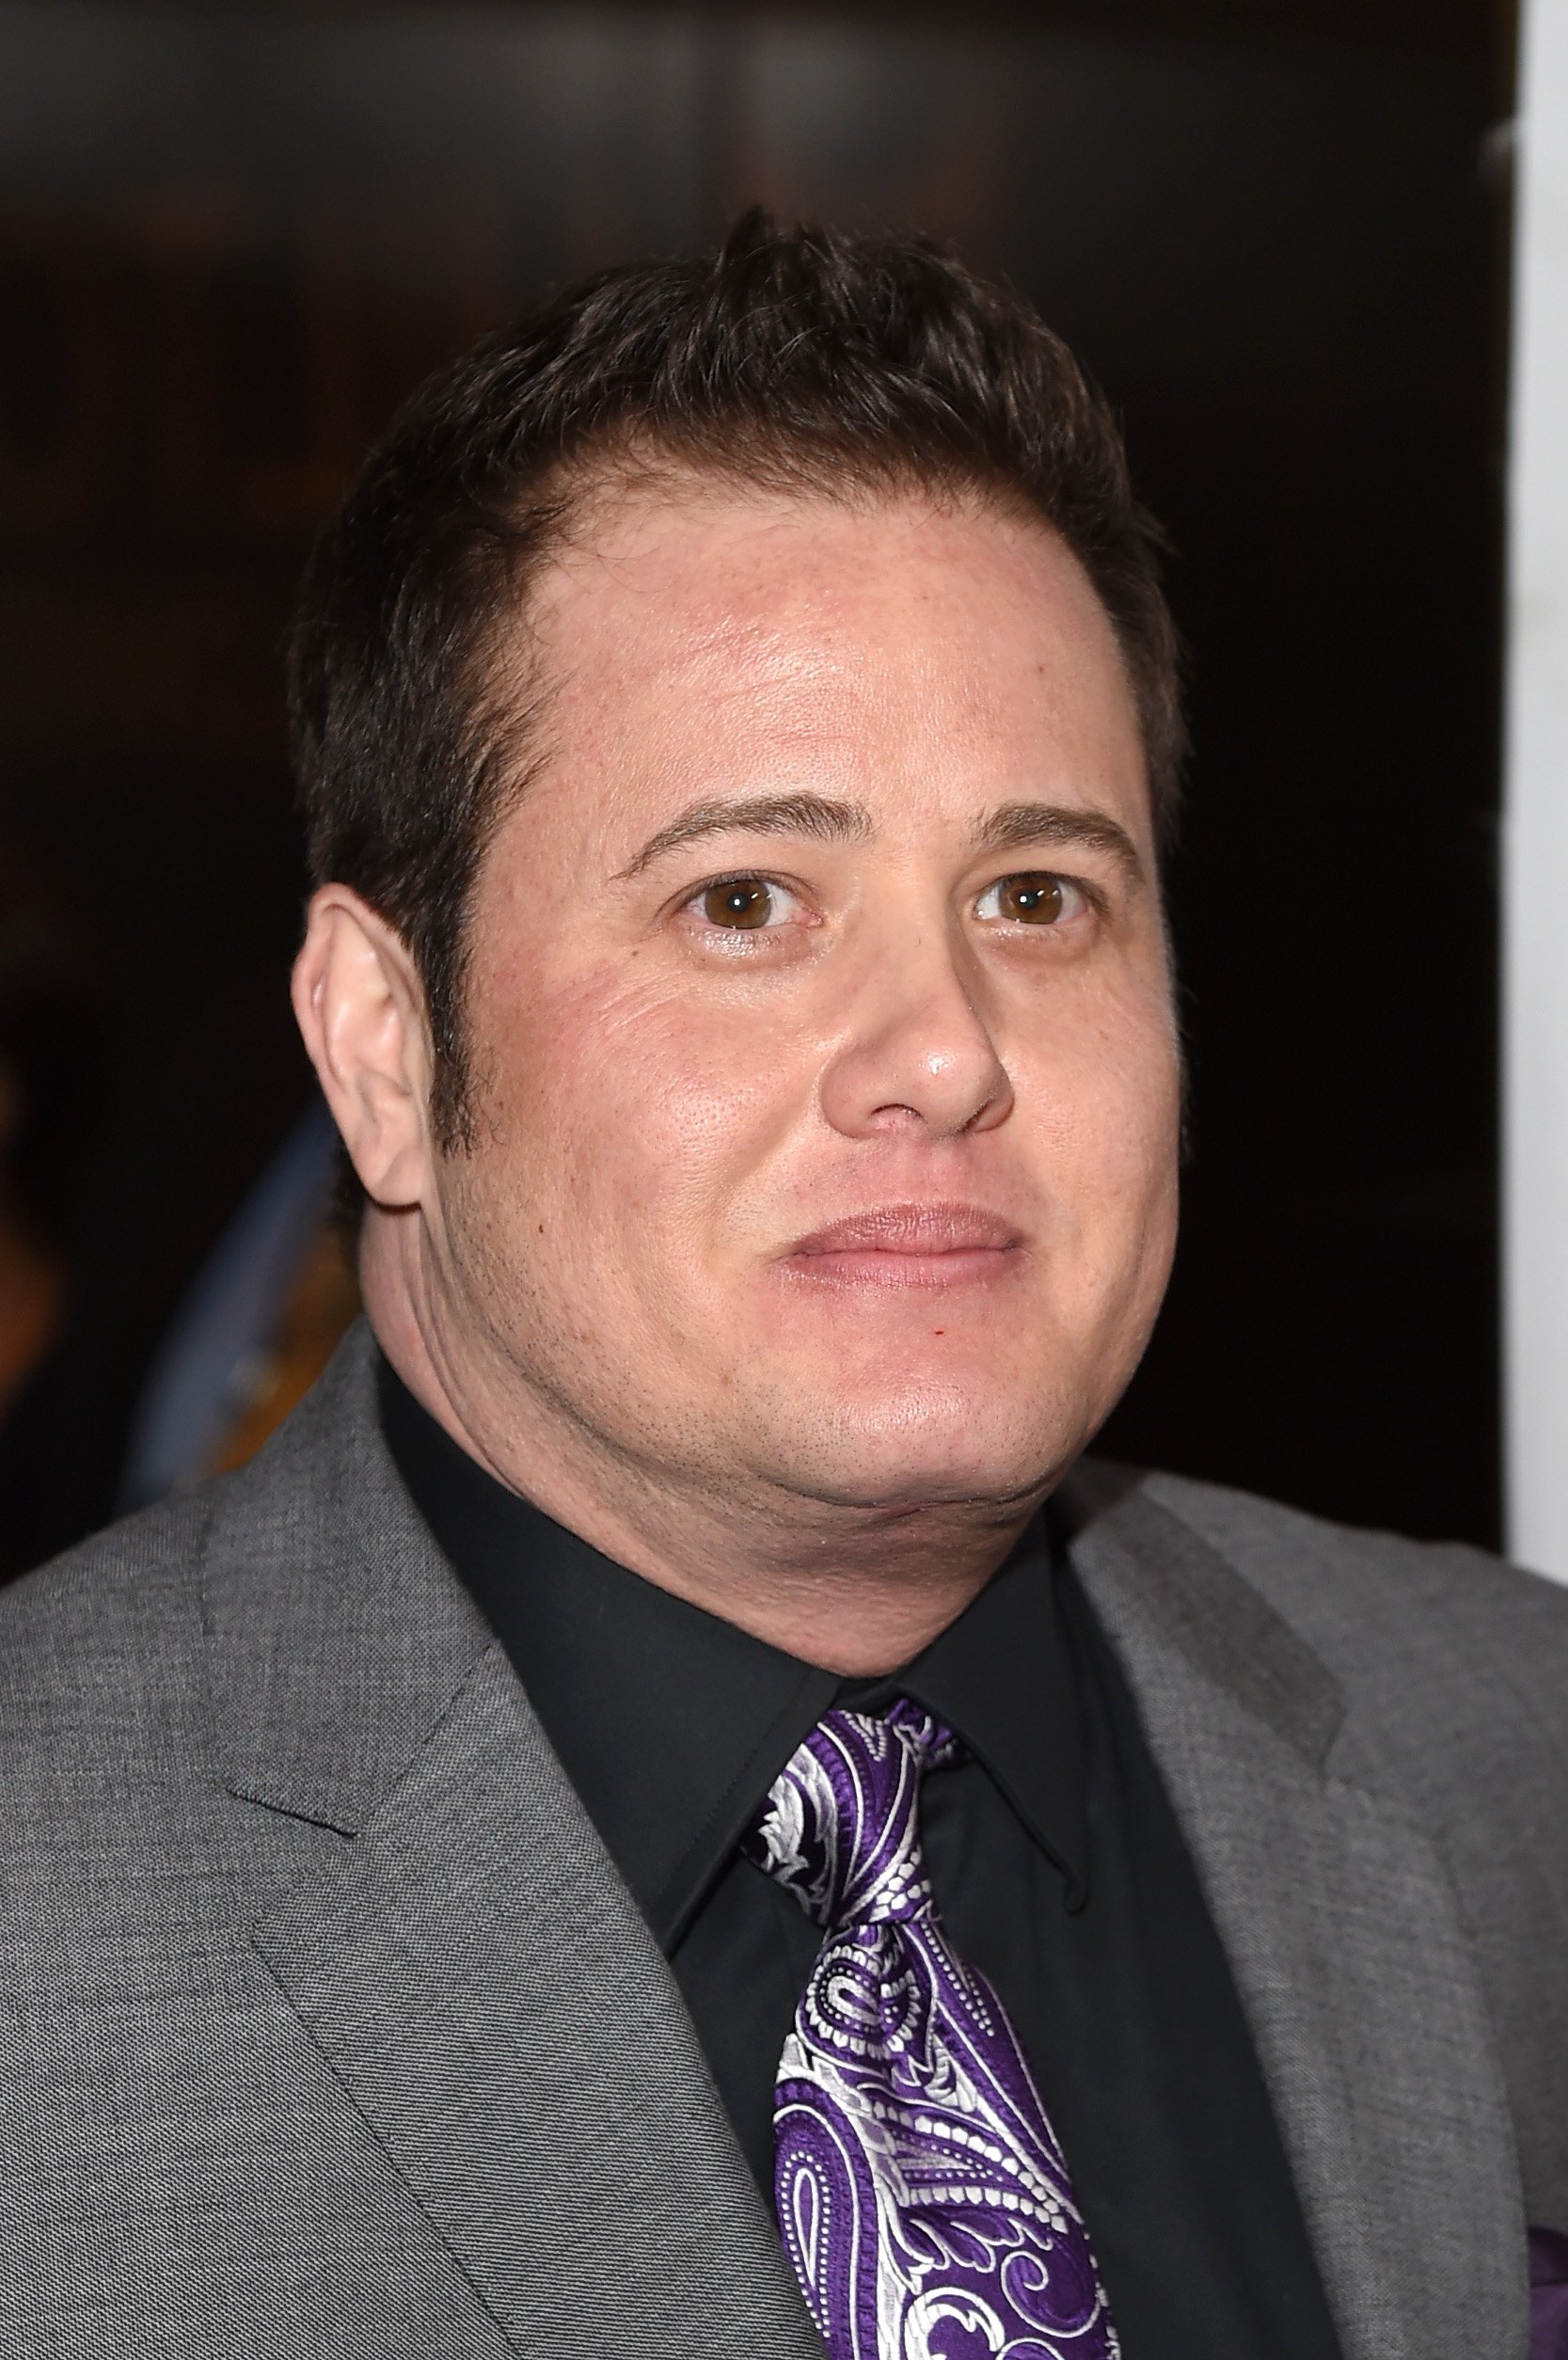 Cher’s Son Chaz Bono on the Moment He Realized He Was Transgender ‘My